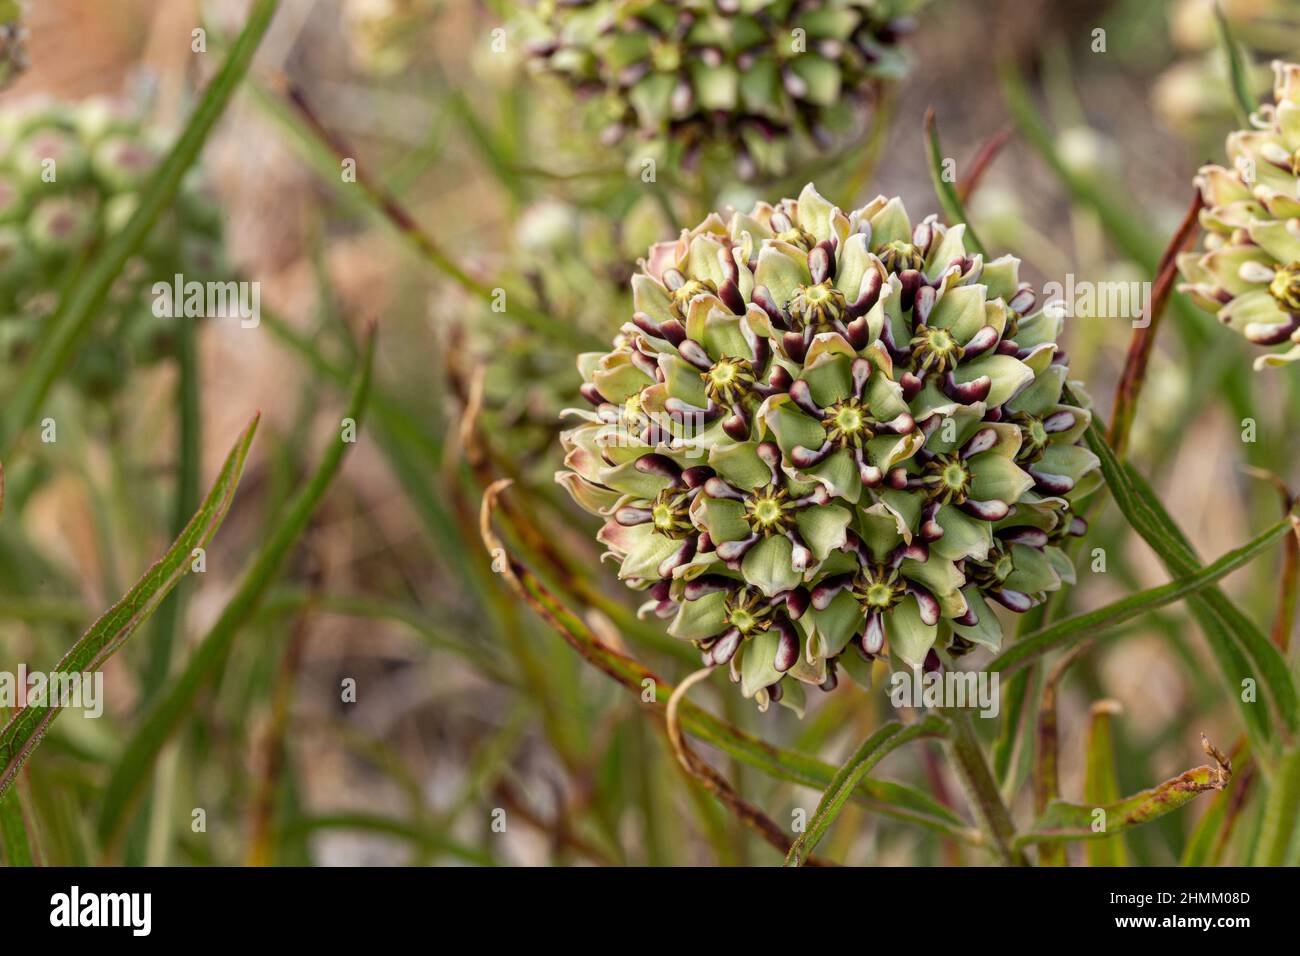 Antelope horns milkweed is an important nectar and host plant for monarch and queen butterflies. Stock Photo